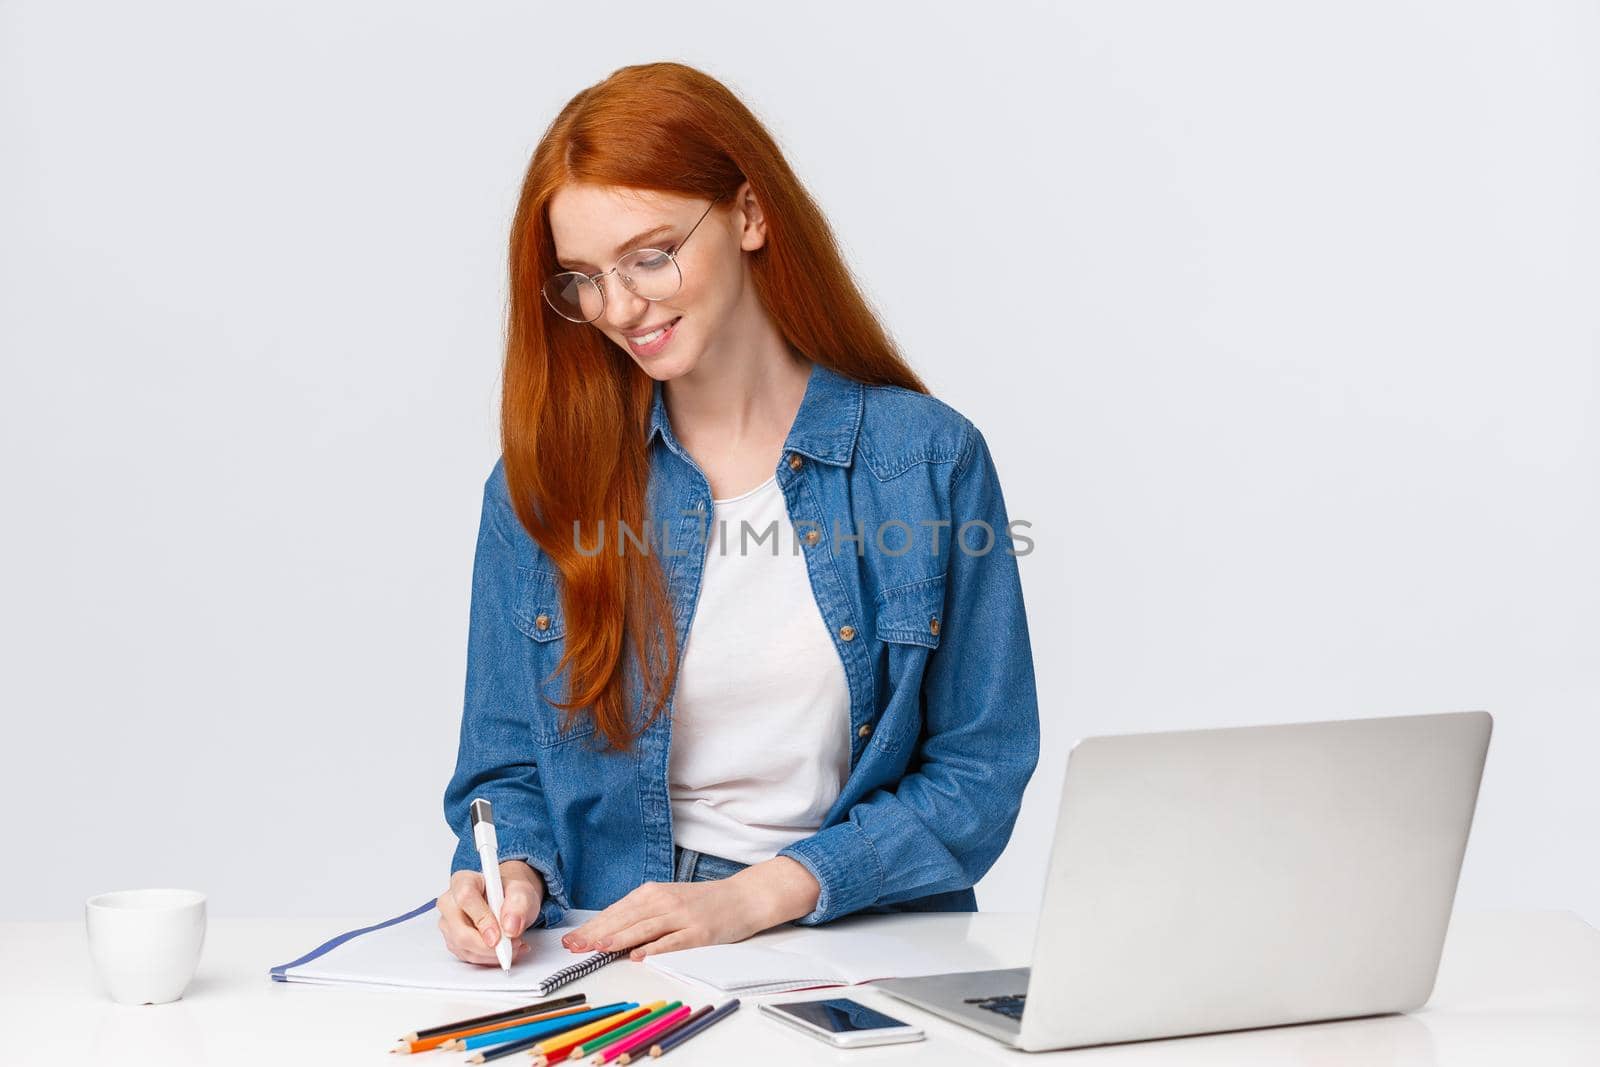 Creative and talented cute girl dream become famous fashion designer, create own designes and project, taking notes as working over tablet with laptop, colored pencils, drawing, white background.